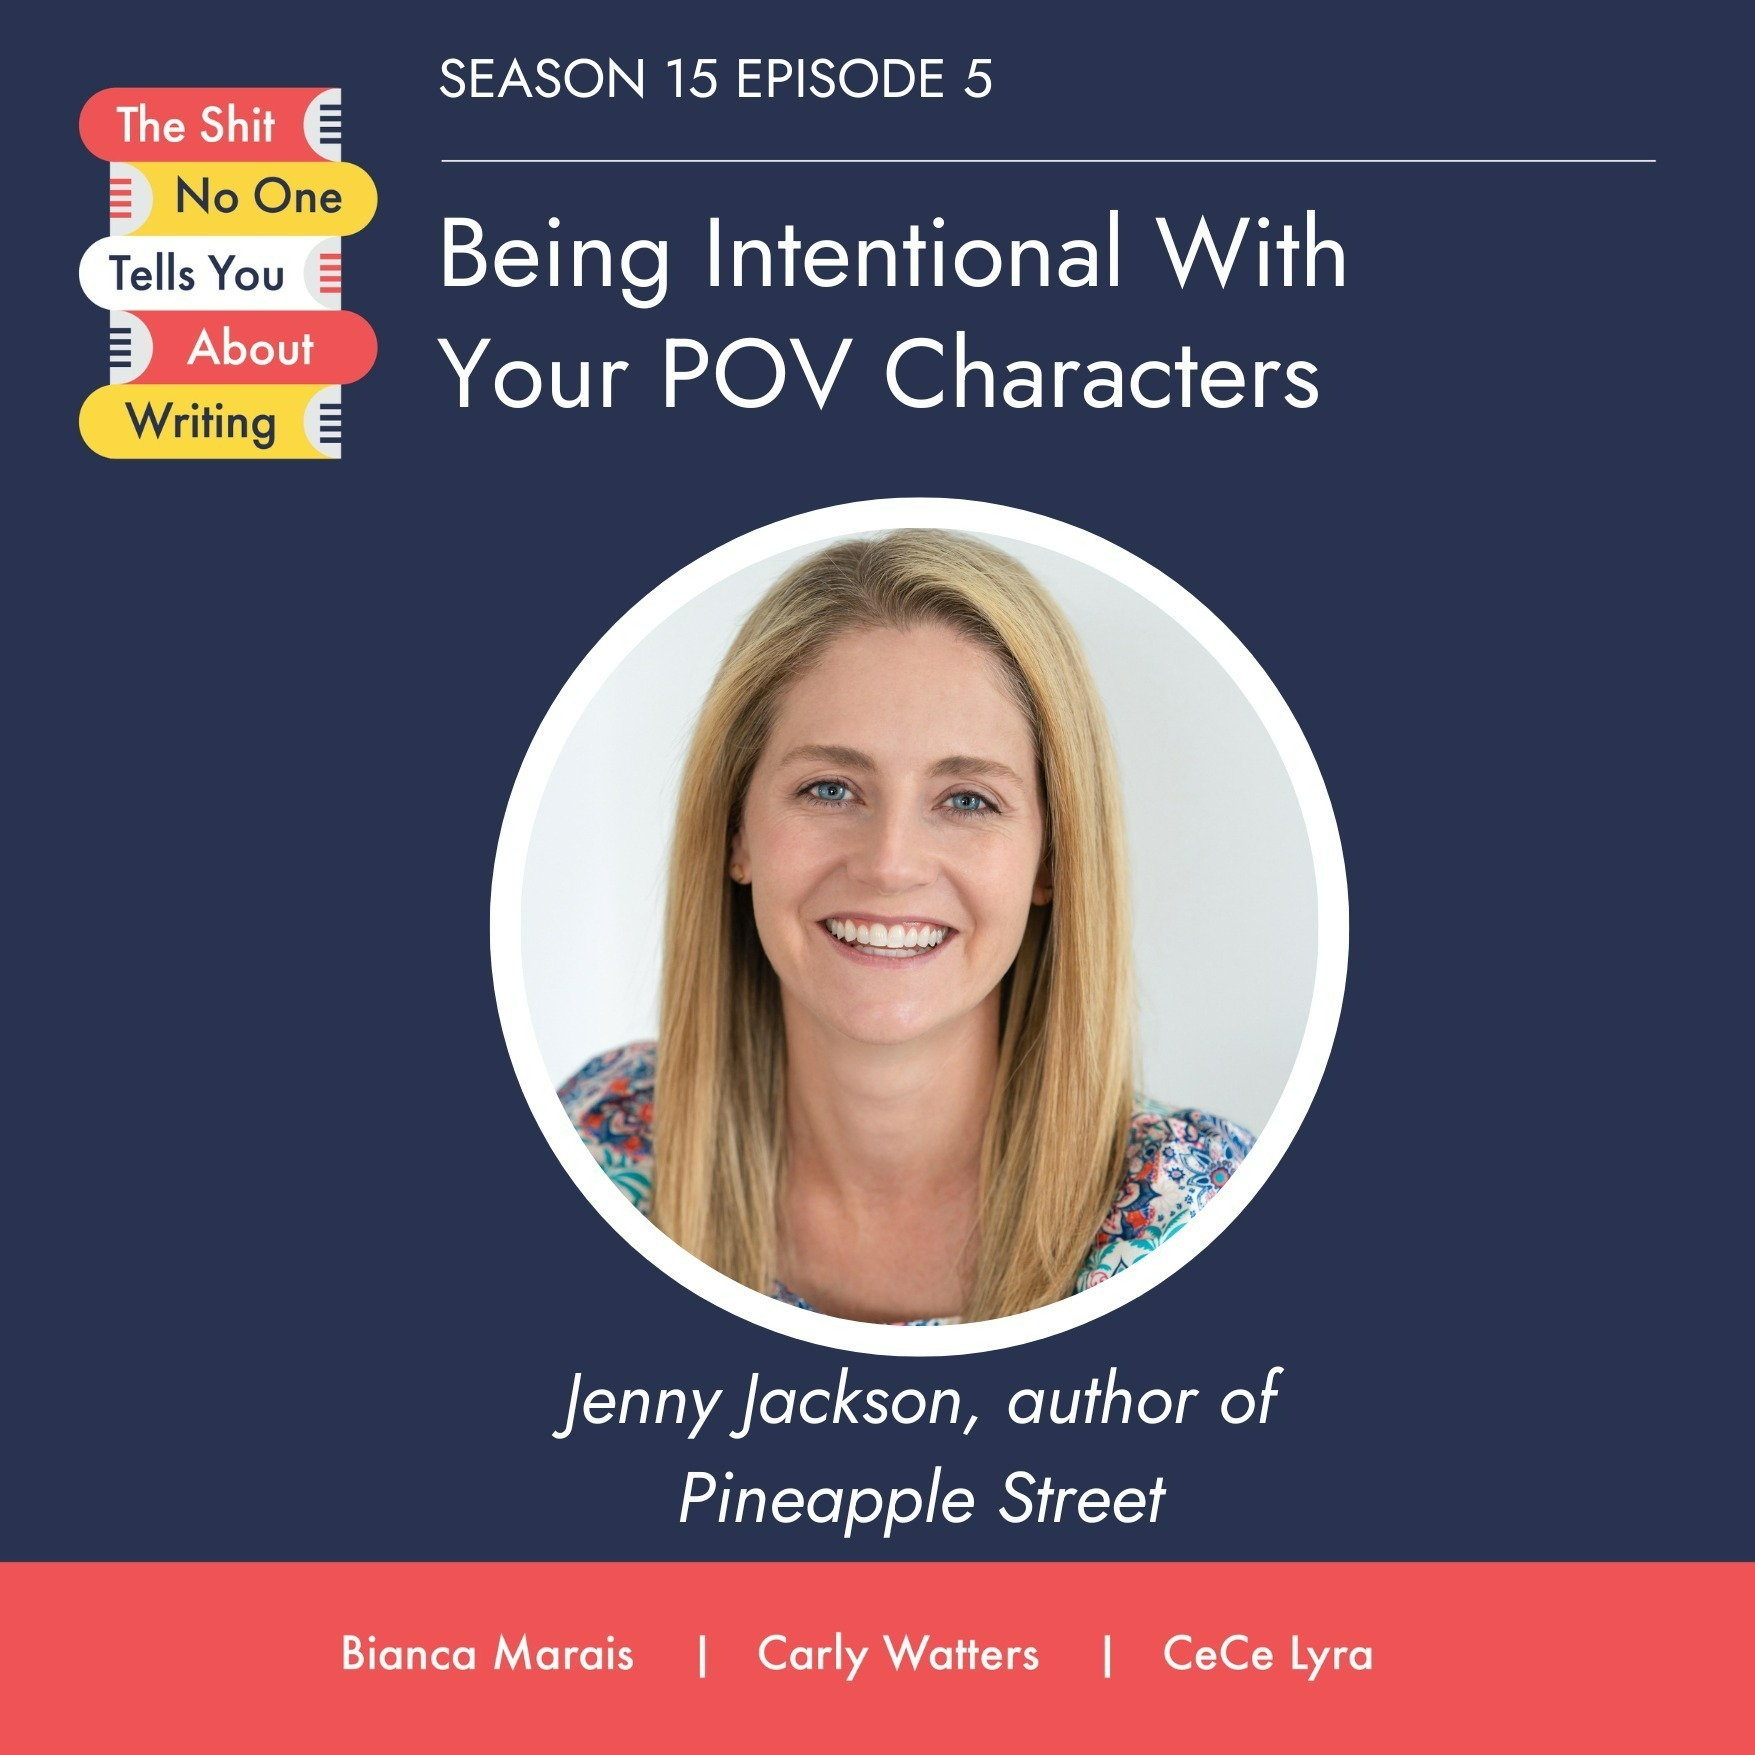 Being Intentional With Your POV Characters